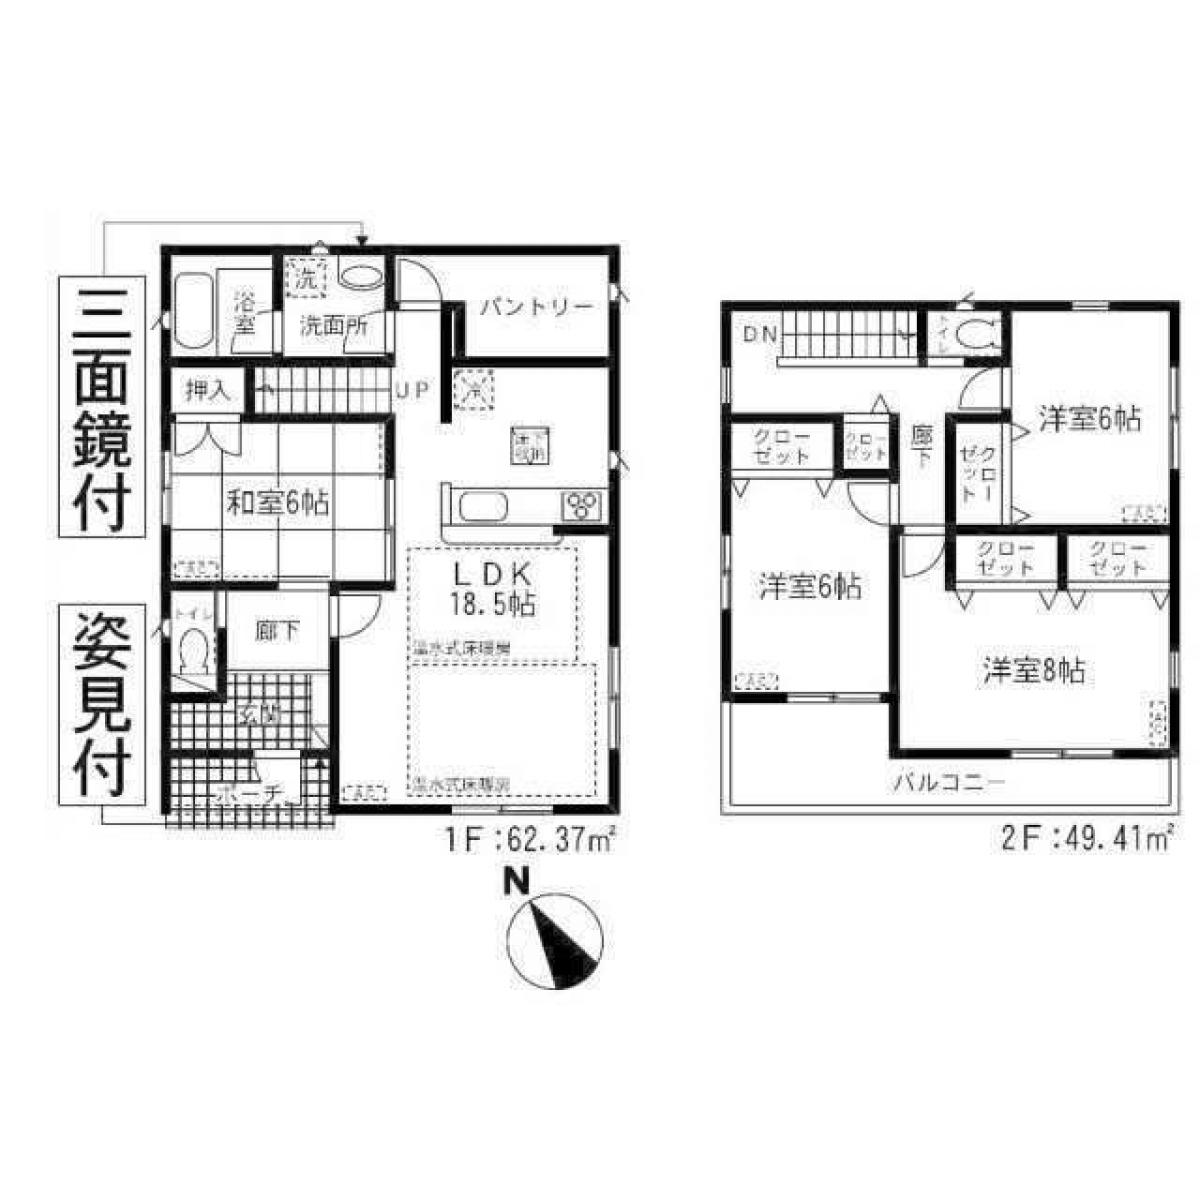 Picture of Home For Sale in Kimitsu Shi, Chiba, Japan